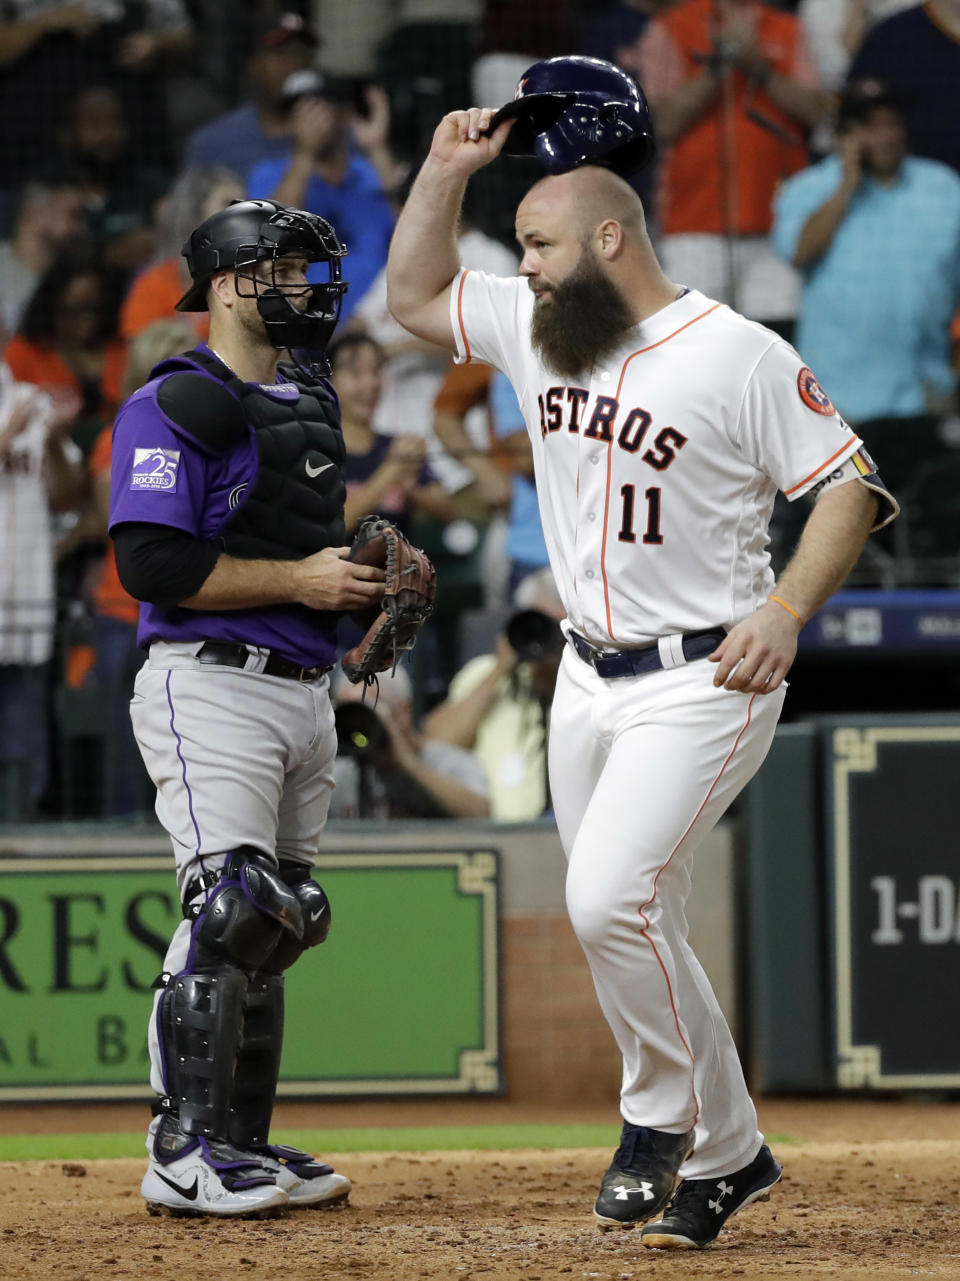 Houston Astros' Evan Gattis (11) celebrates after hitting a home run as Colorado Rockies catcher Chris Iannetta stands near home plate during the fifth inning of a baseball game Wednesday, Aug. 15, 2018, in Houston. (AP Photo/David J. Phillip)